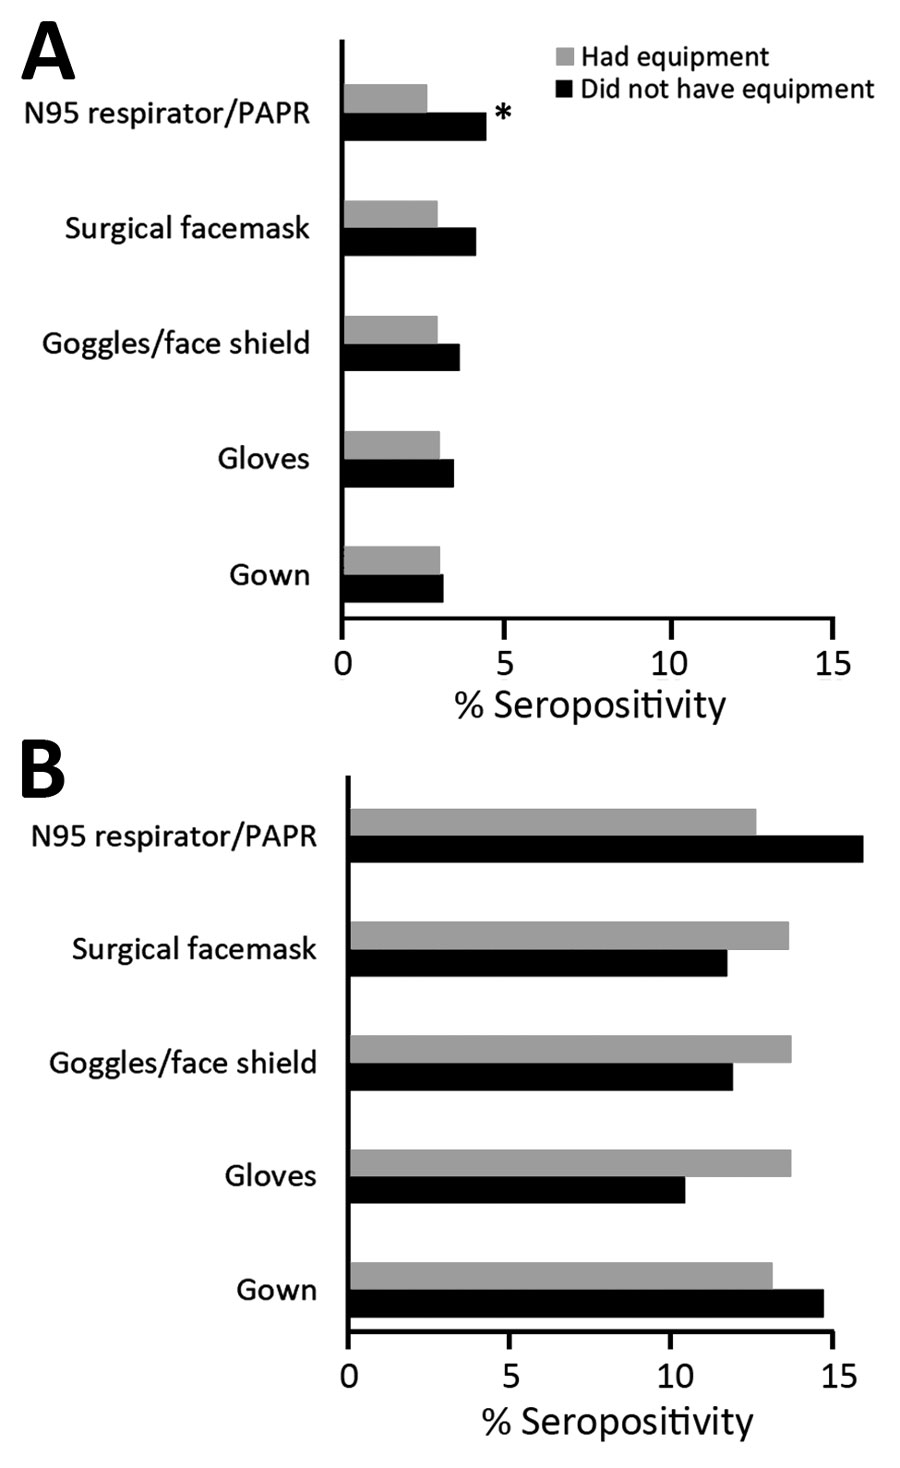 Seropositivity for severe acute respiratory syndrome coronavirus 2 among hospital and nursing home personnel, by having/not having specific PPE, Rhode Island, USA, July–August 2020. Excludes participants who reported no PPE use (19.6% of those in hospital settings, seropositivity 3.4%; 12.4% of those in nursing home settings, seropositivity 12.4%). Asterisk (*) indicates statistically significant difference (p<0.05 by χ2 test). PPE, personal protective equipment.